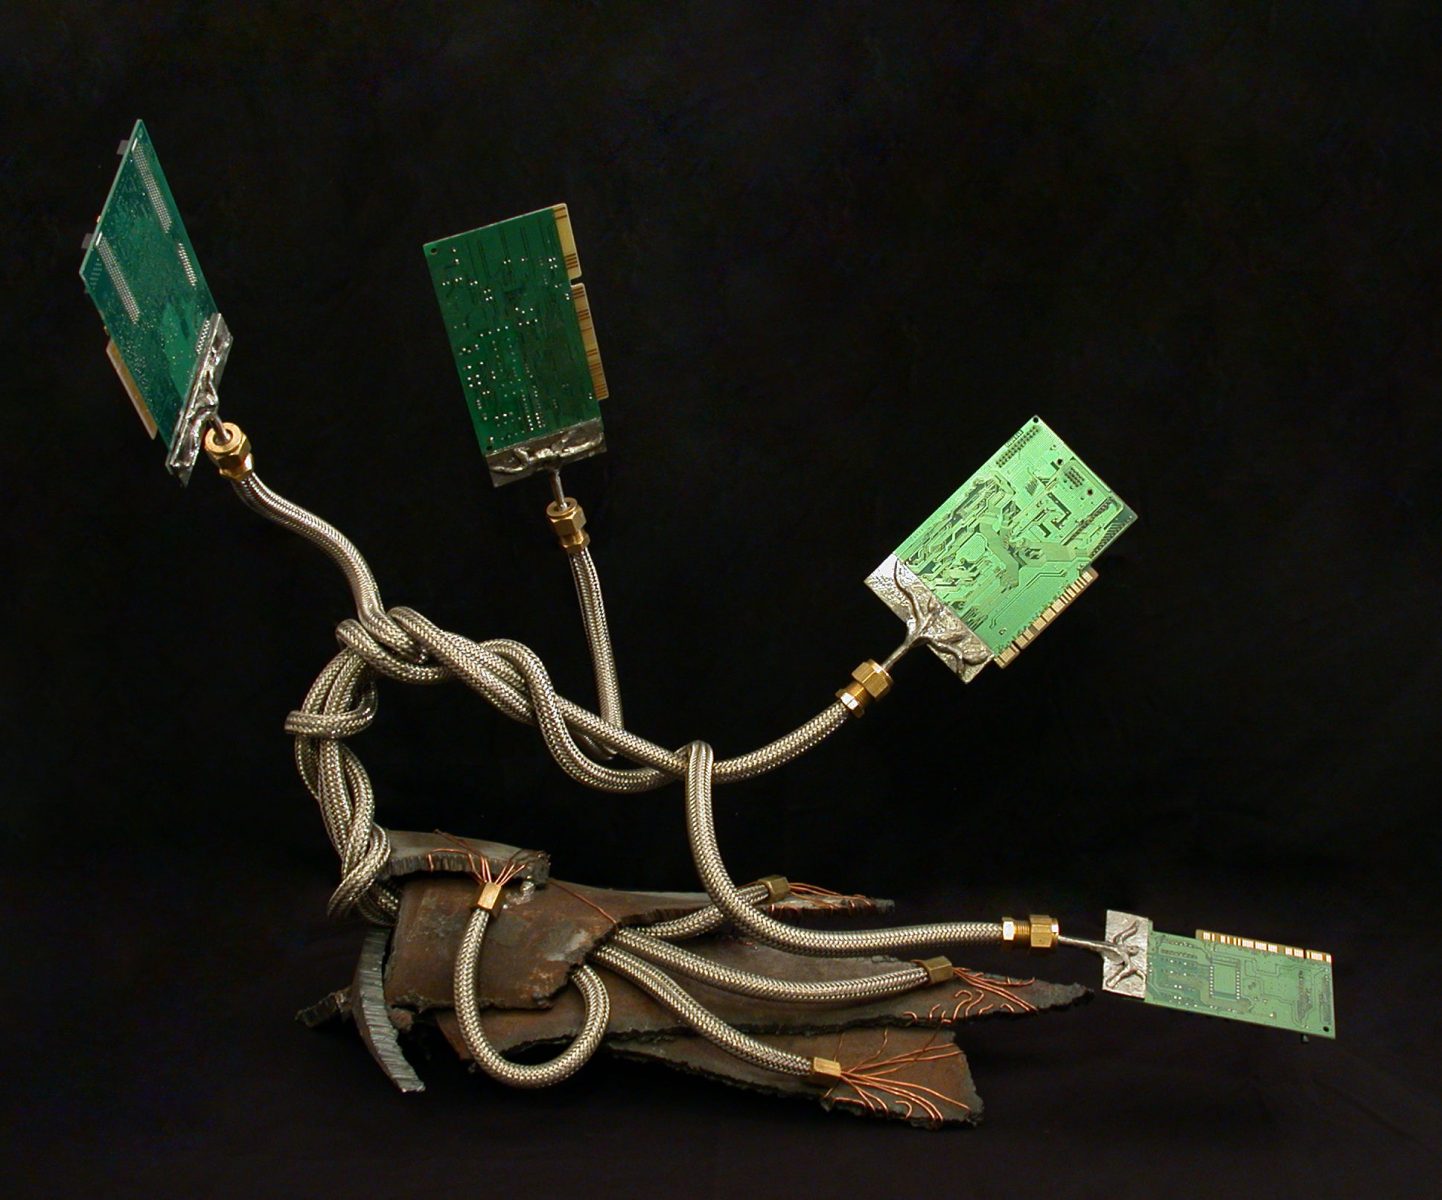 Sculpture of a bonsai tree made with eWaste